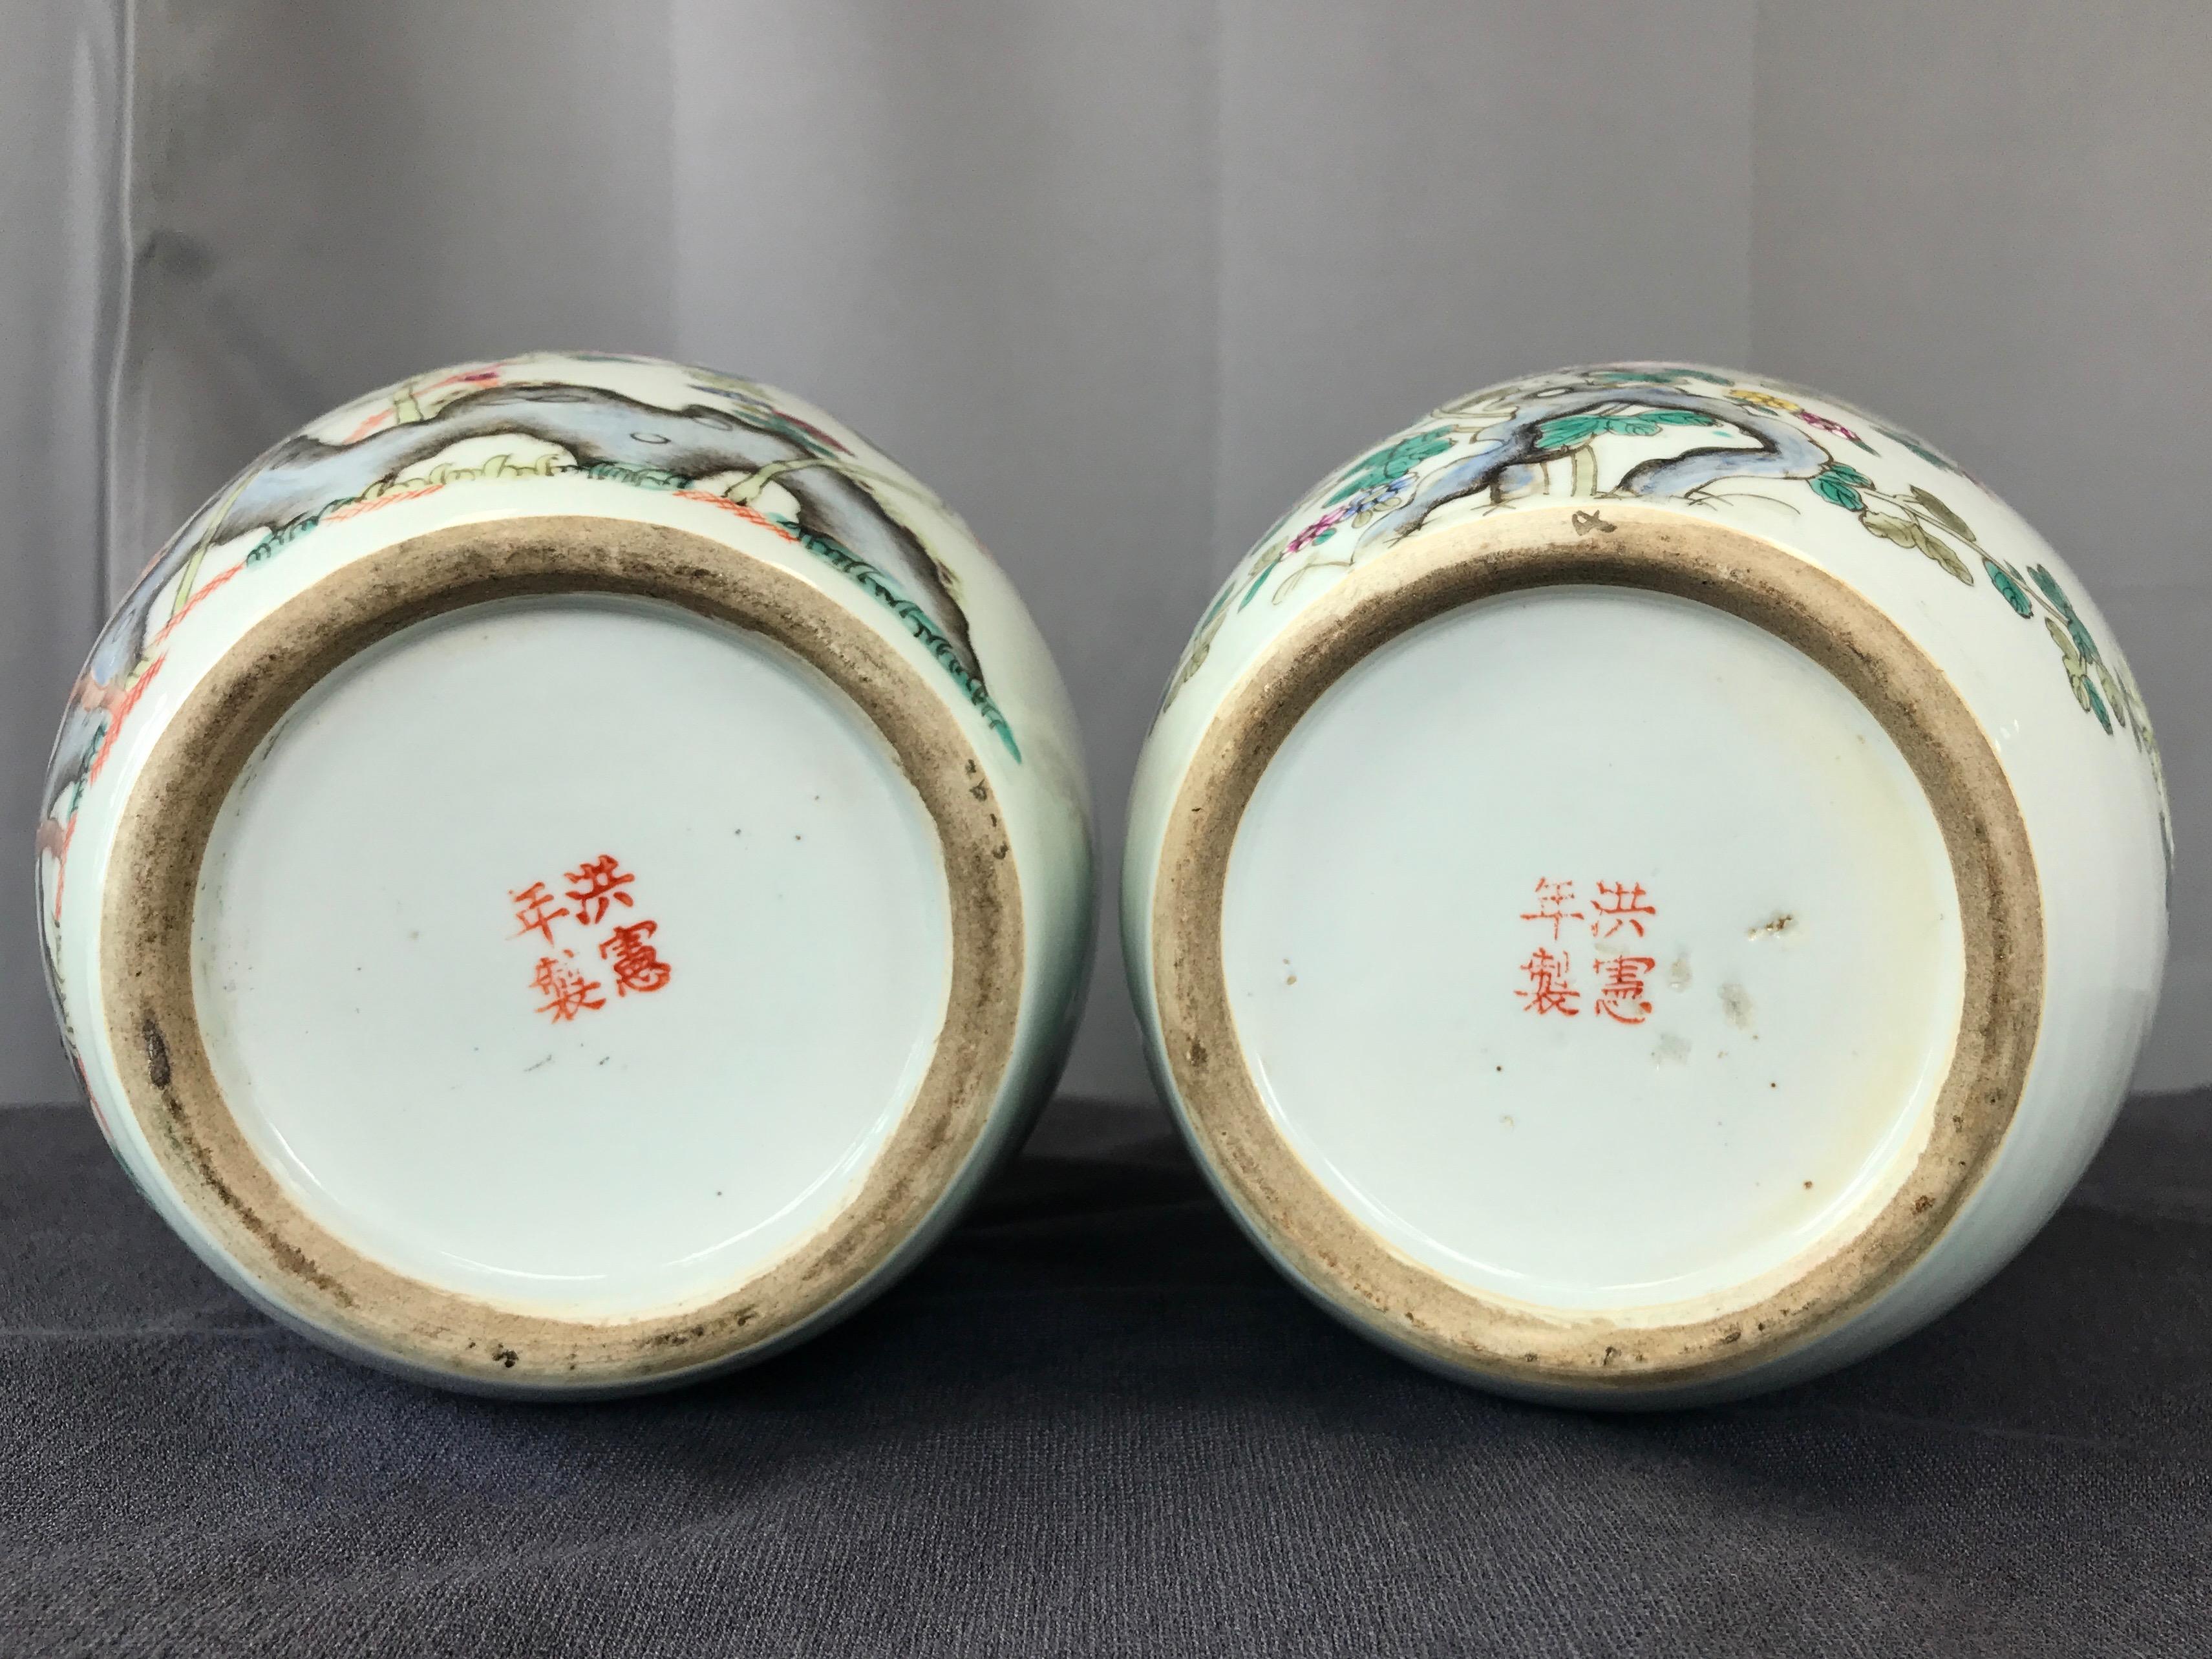 Pair of Fine Chinese Famille Rose Porcelain Covered Vases, Guangxu Period  8